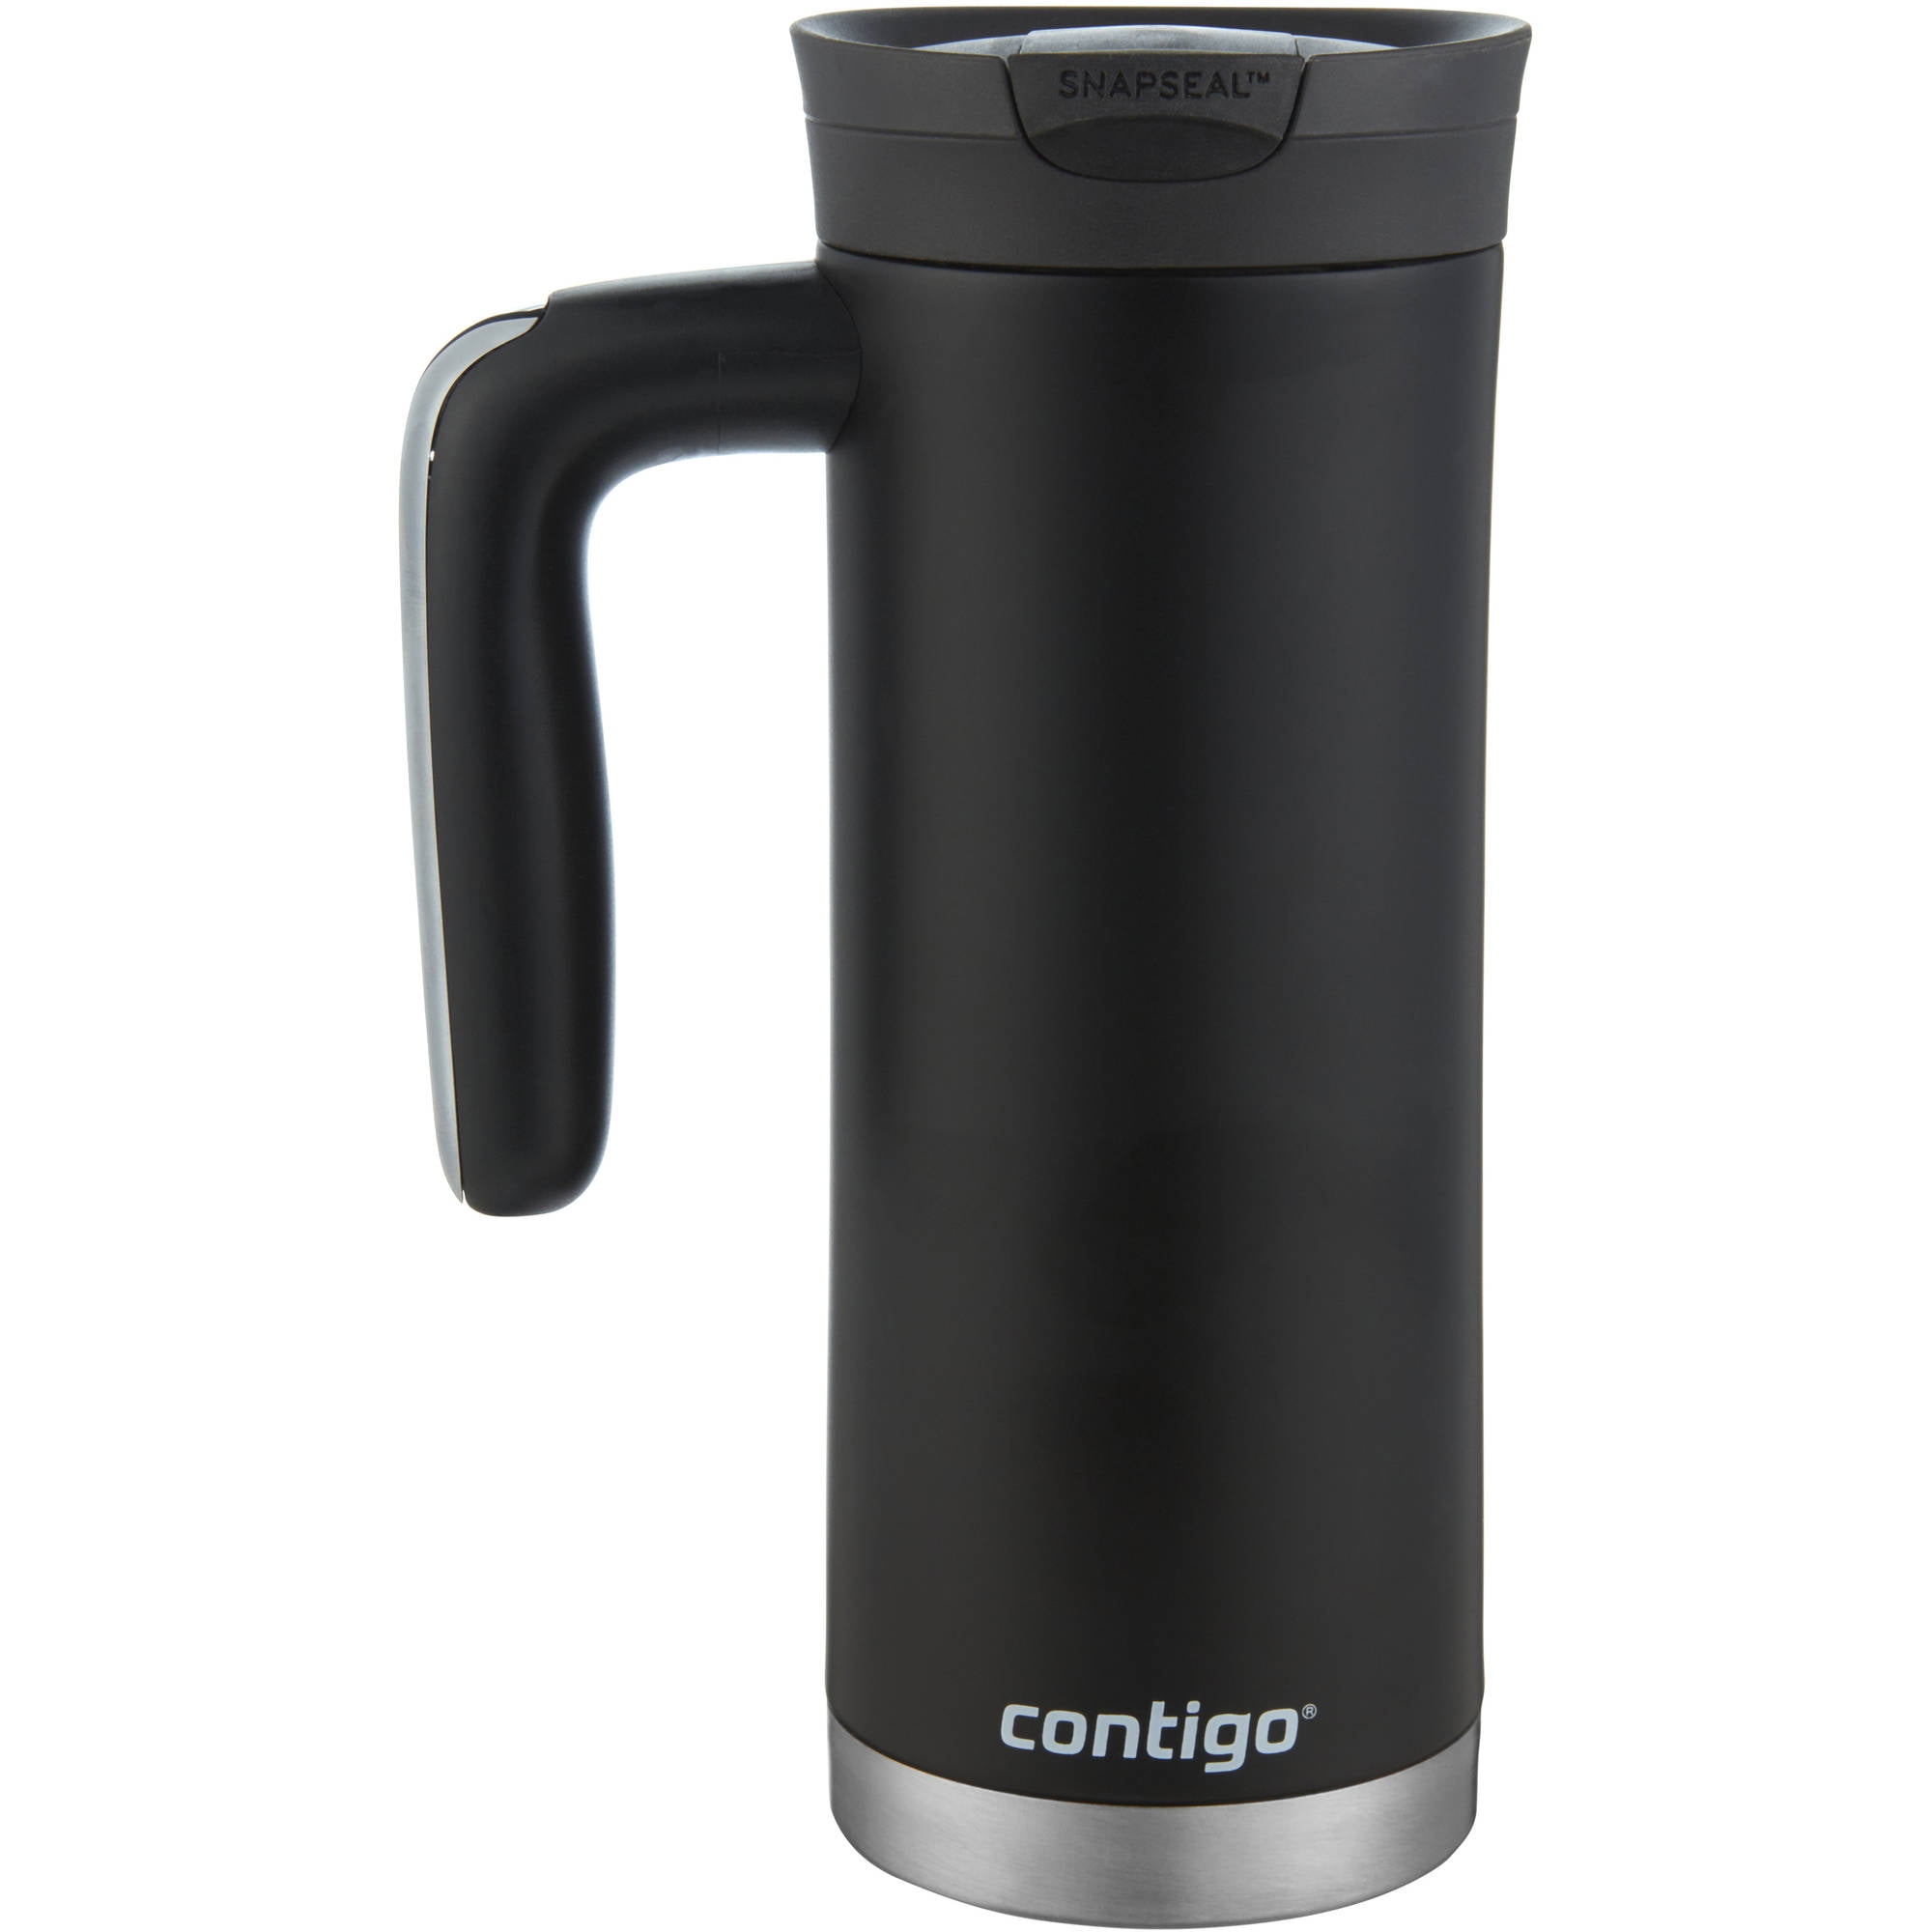 Contigo SNAPSEAL Superior Stainless Steel Travel Mug with Handle 20 70879ZCN 